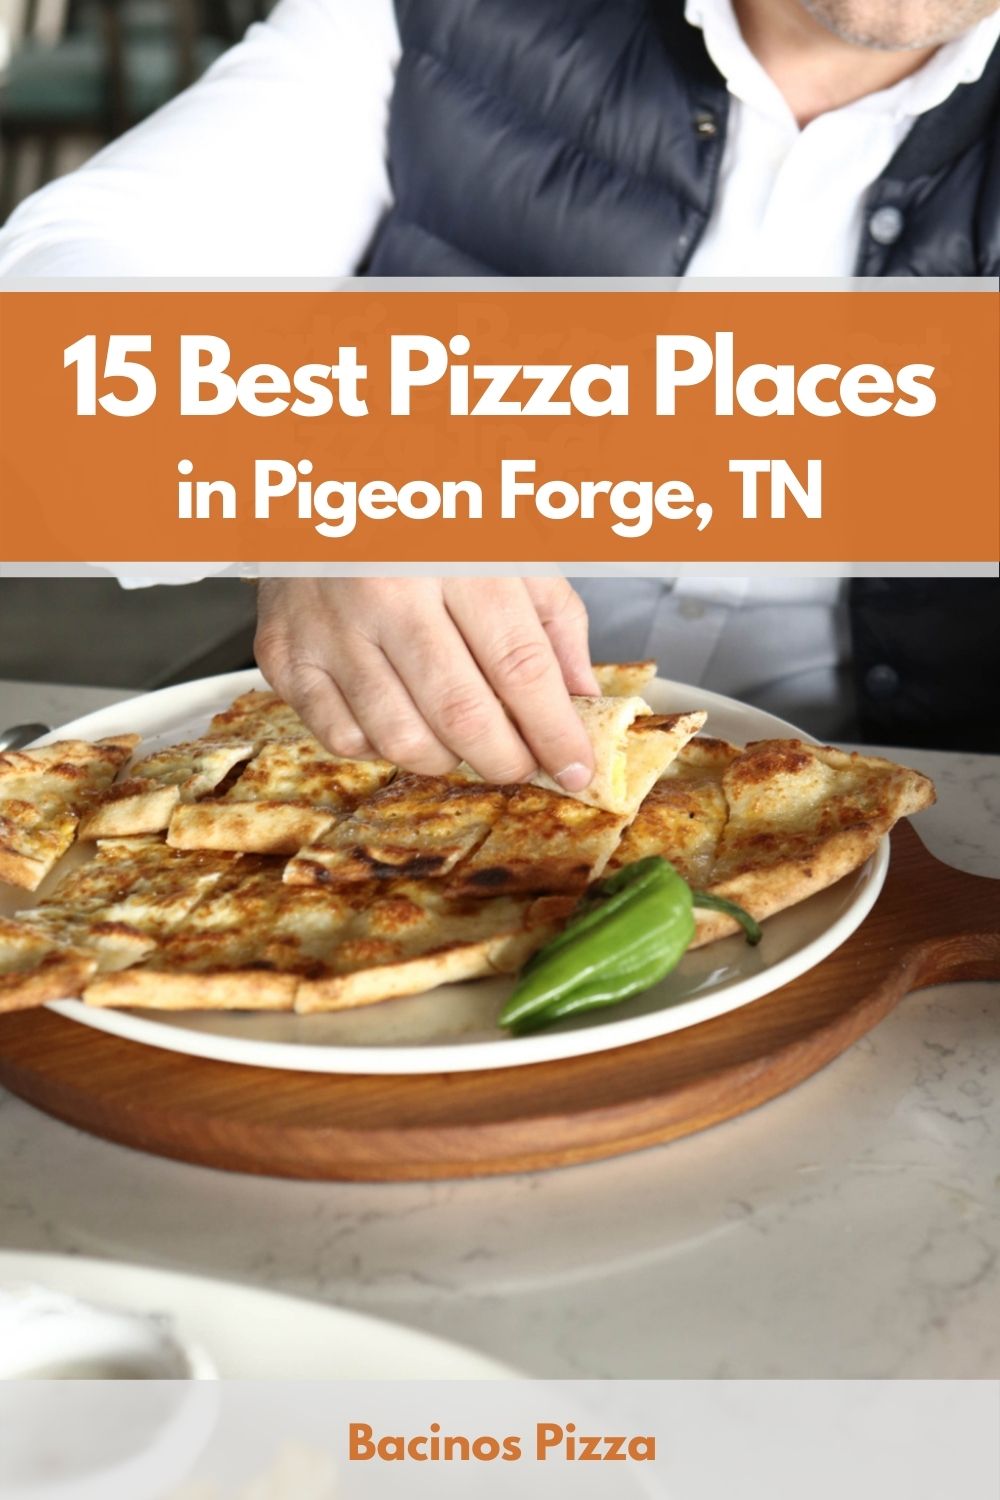 15 Best Pizza Places in Pigeon Forge, TN pin 2